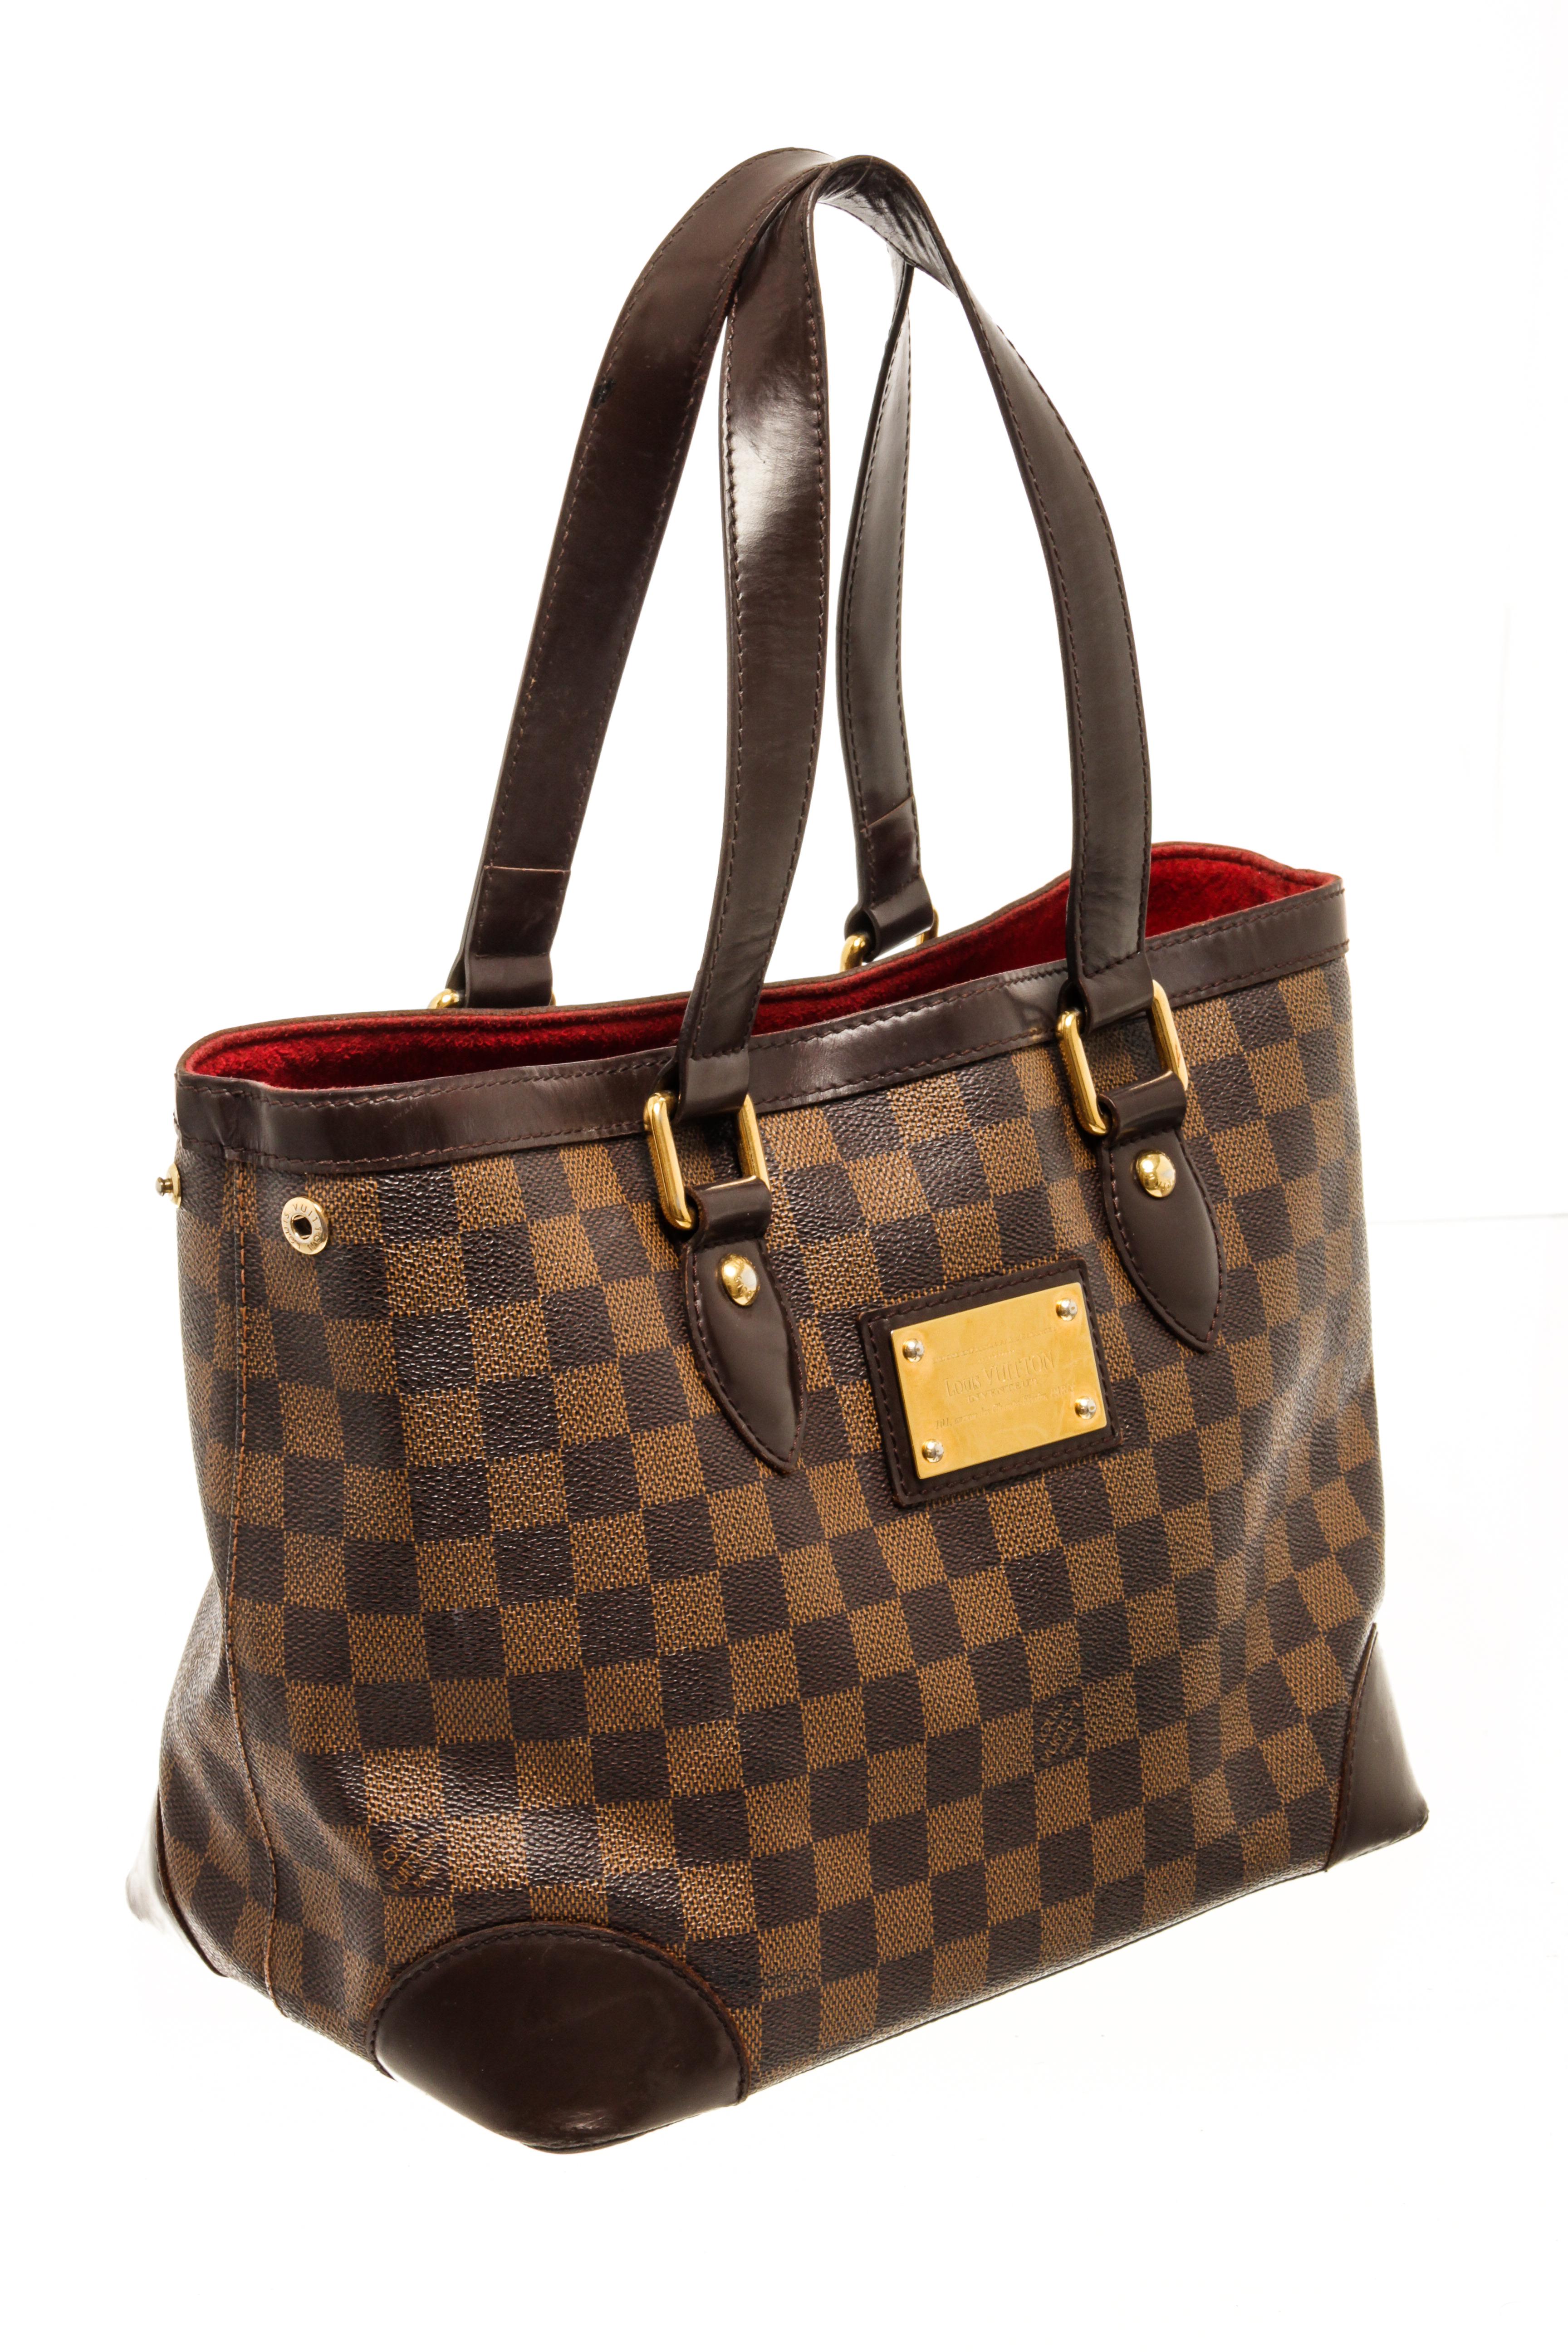 Louis Vuitton Damier Ebene Hampstead PM with clasp closure, one zip interior pocket, gold hardware, red fabric lining.

80020MSC